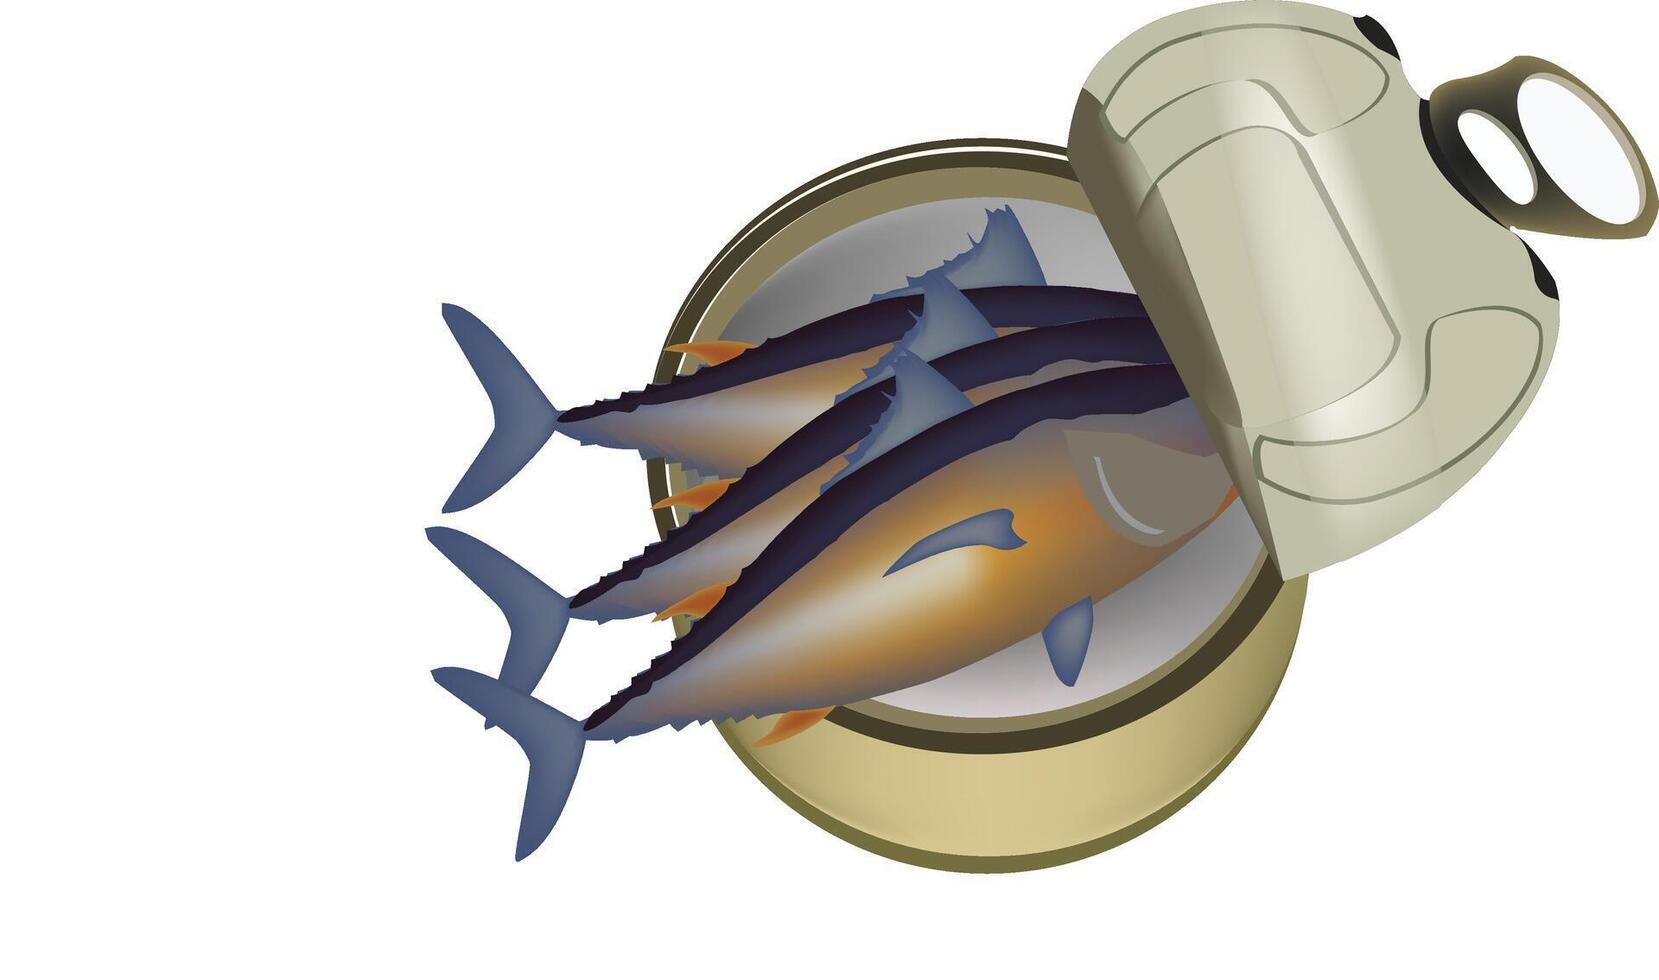 Graphic image depicting tuna trapped in a sardine can, symbolizing overfishing vector